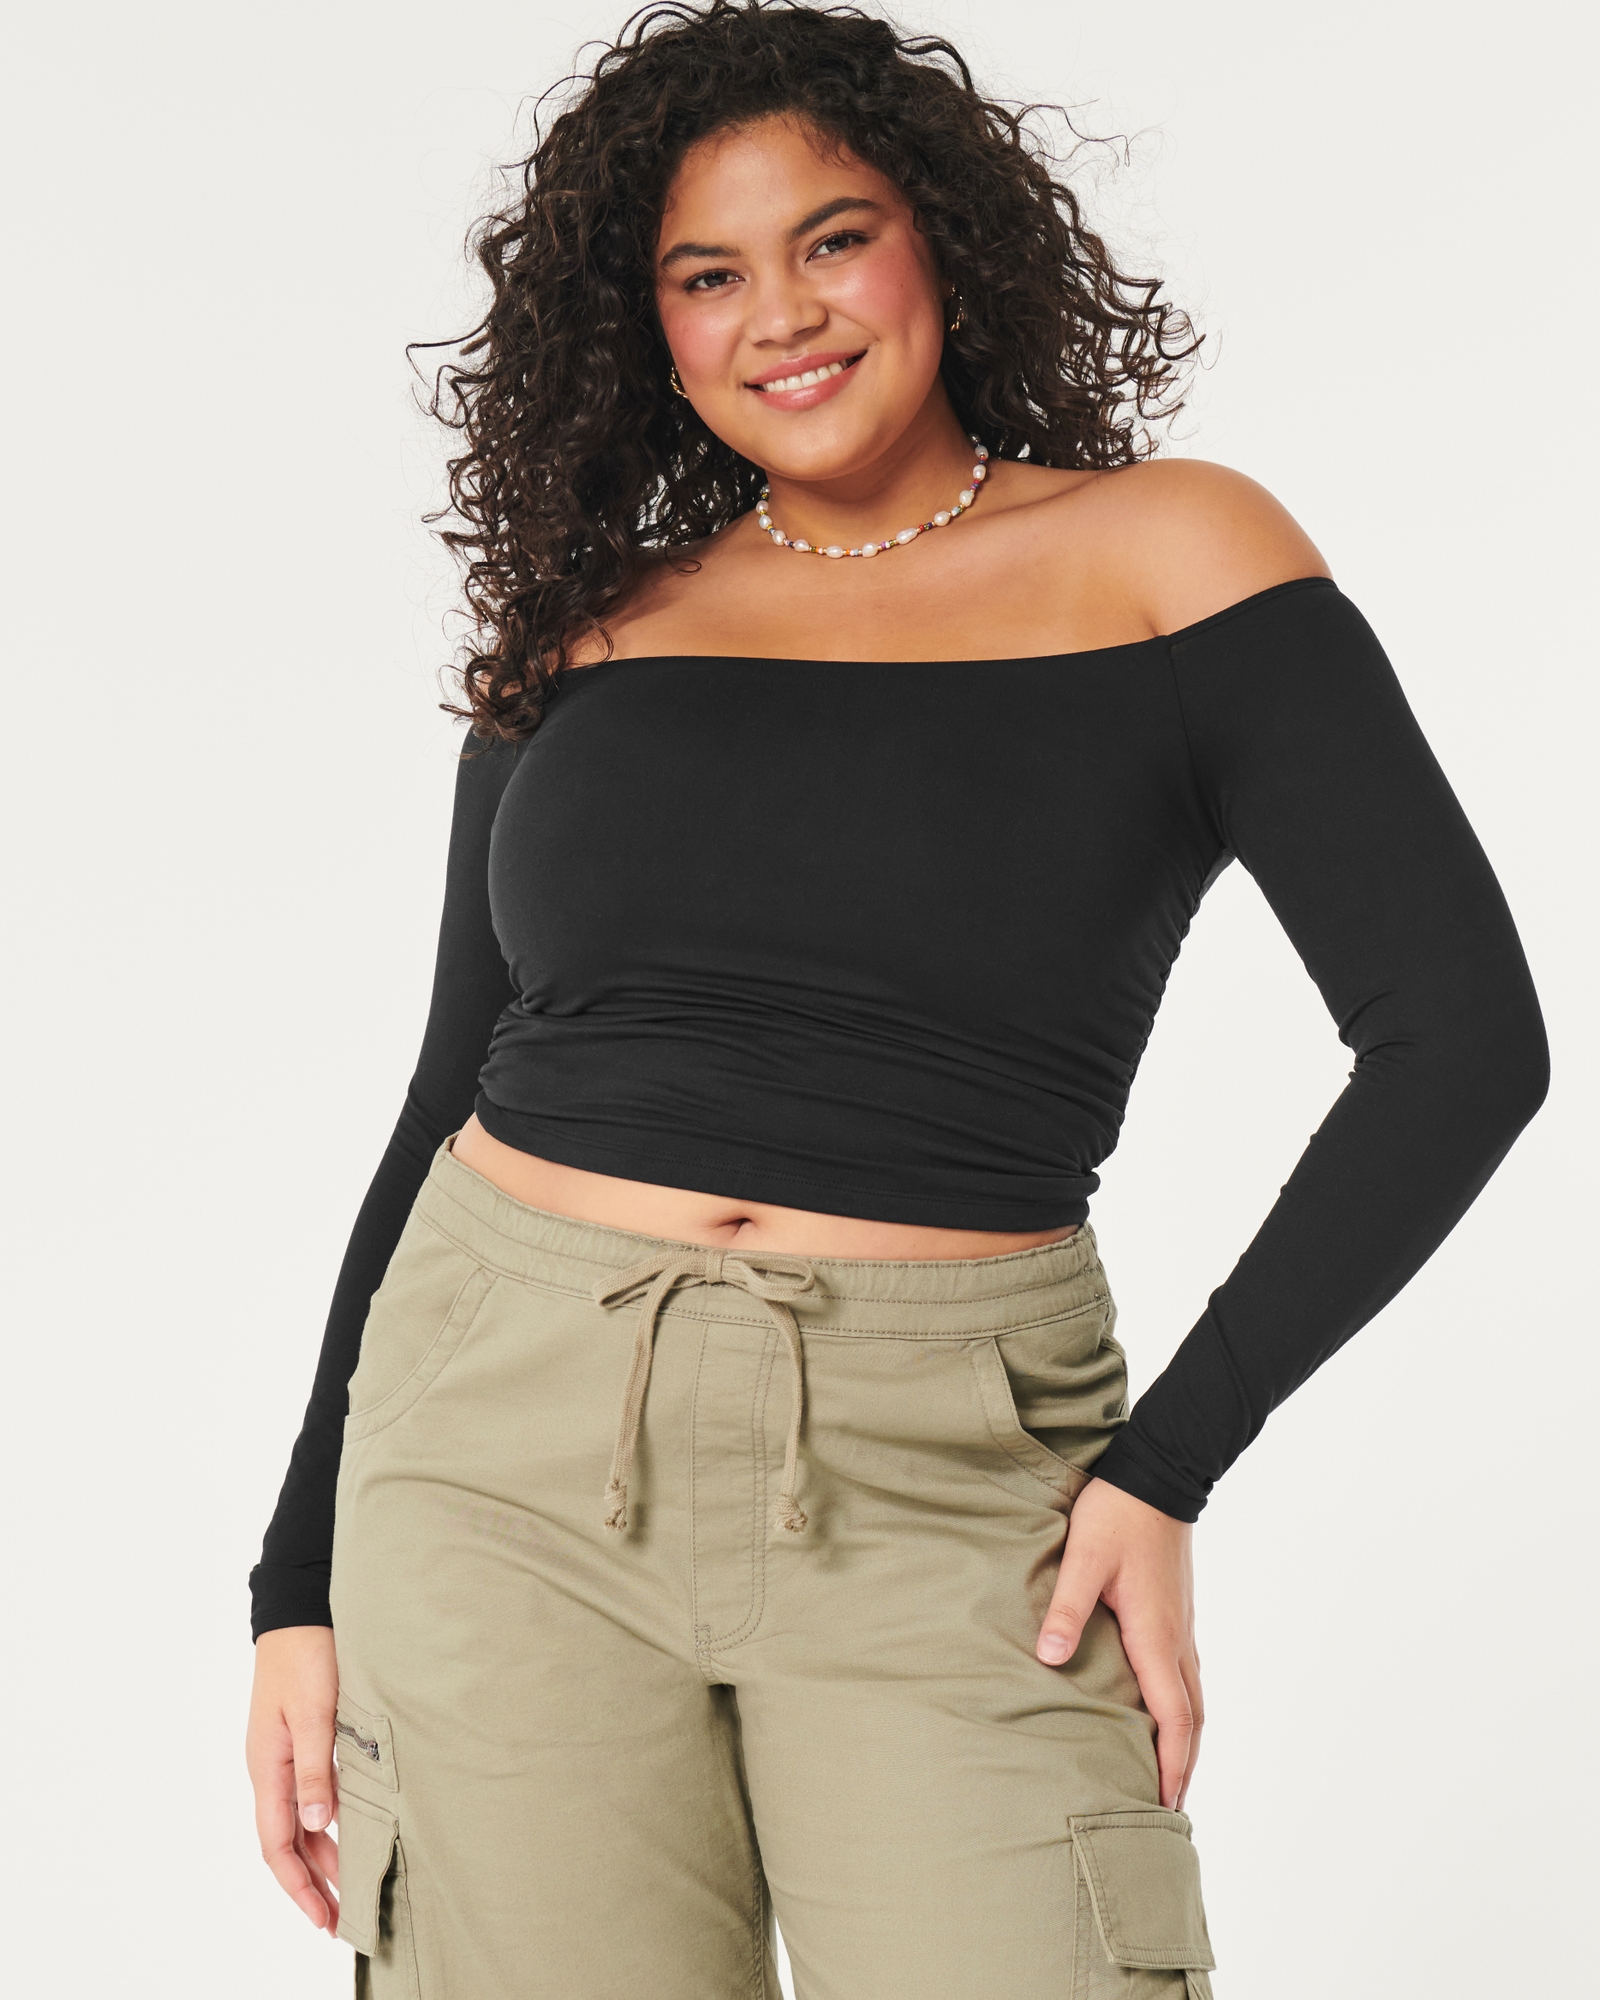 https://img.hollisterco.com/is/image/anf/KIC_339-3484-0072-900_model1.jpg?policy=product-extra-large